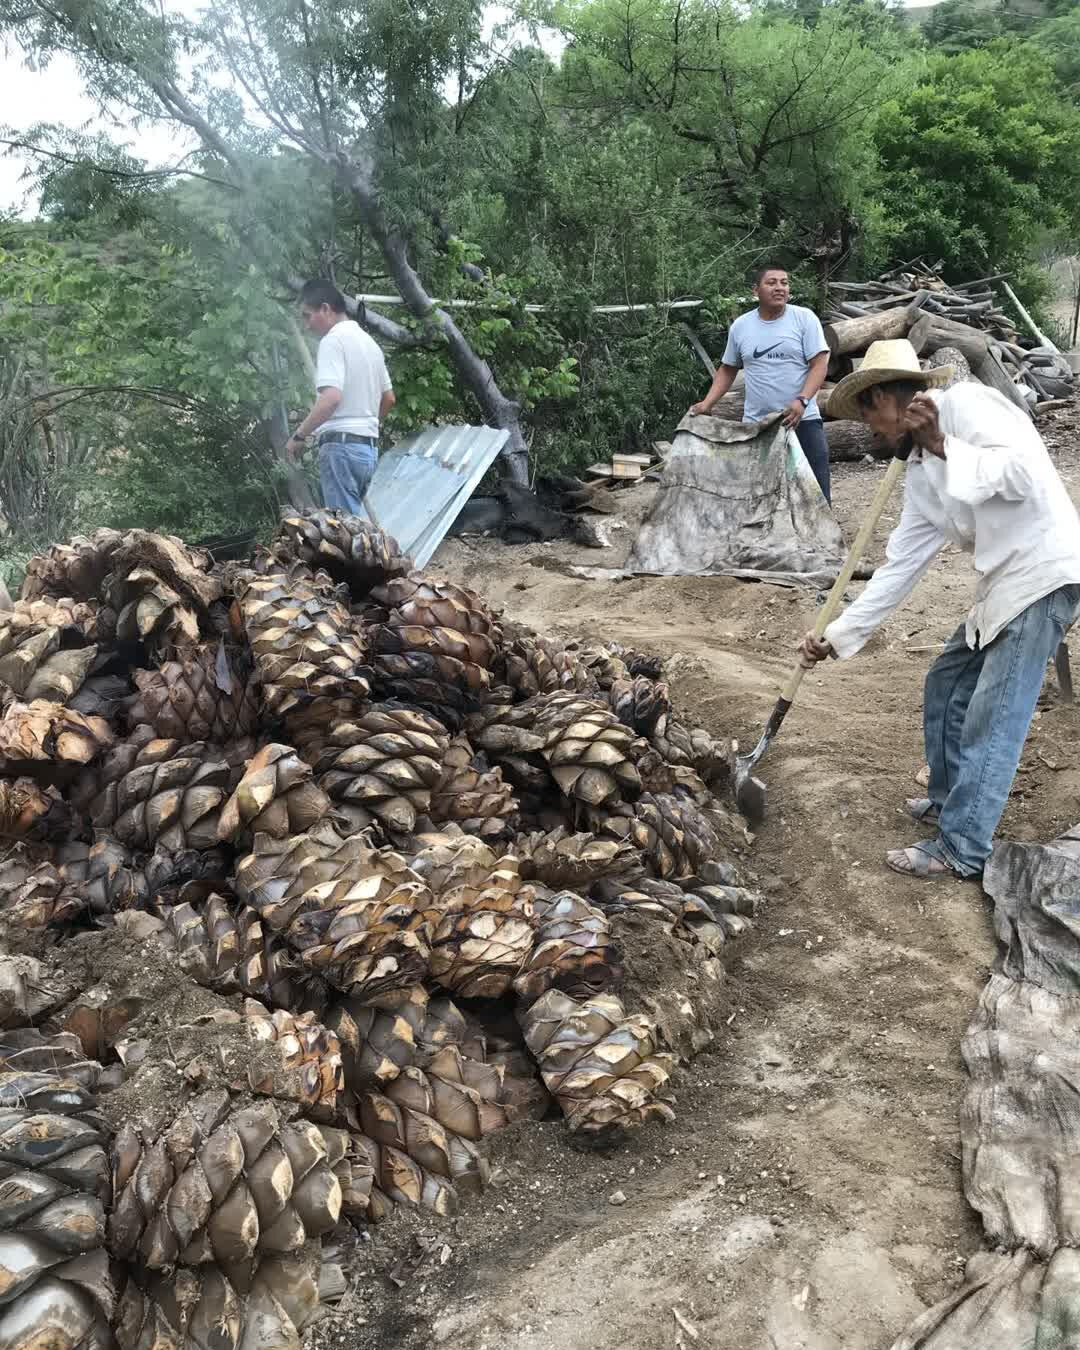 Benesin is not a mass produced Mezcal because we believe in quality and balance with Mother Earth. We bring the best of generations of knowledge in Mezcal production from the very same people that have consumed and produced mezcal in the communities 